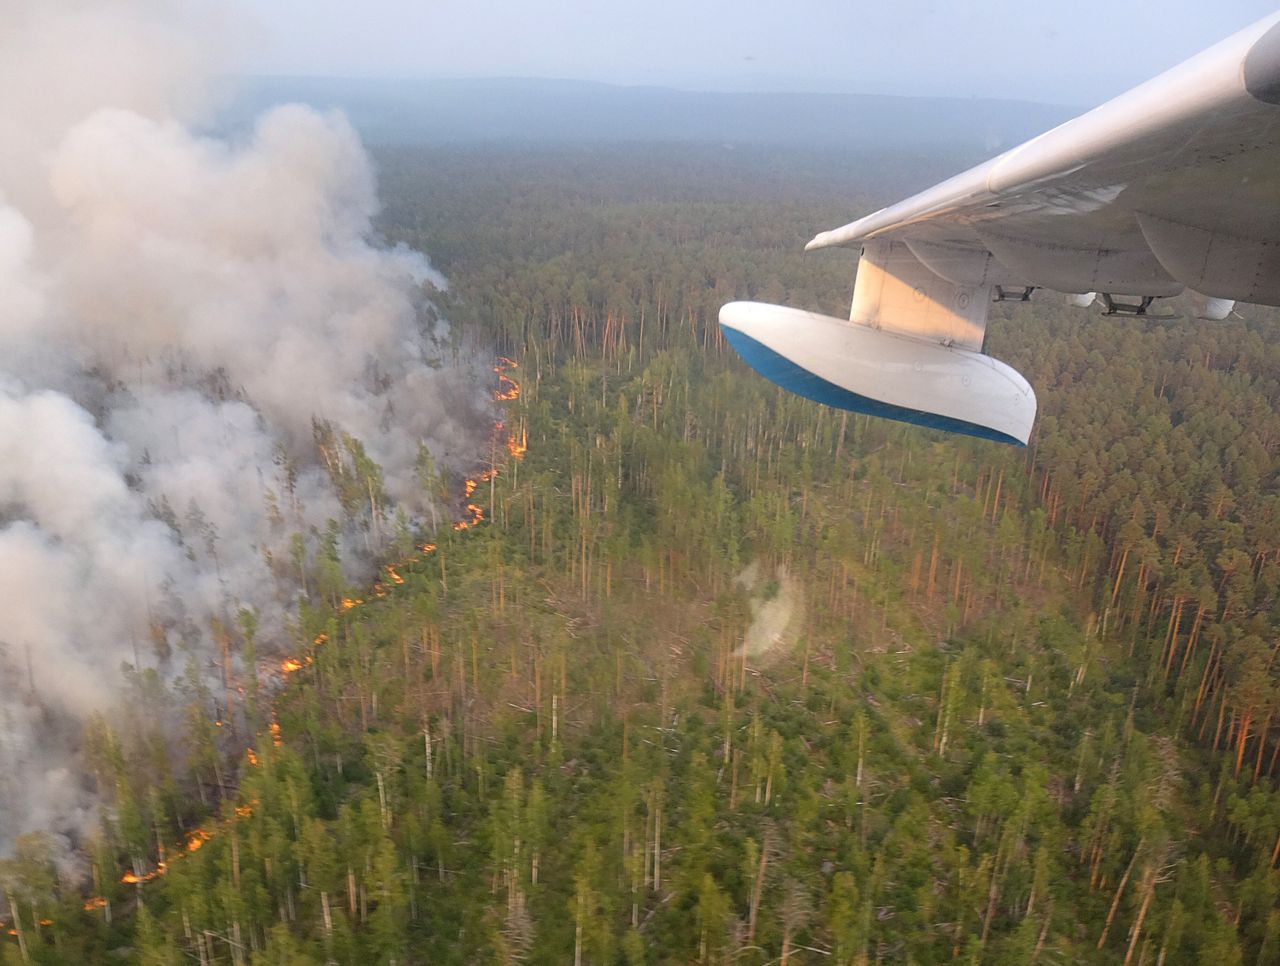 A view of a wildfire from a Beriev Be-200 amphibious aircraft in Russia's Krasnoyarsk Territory